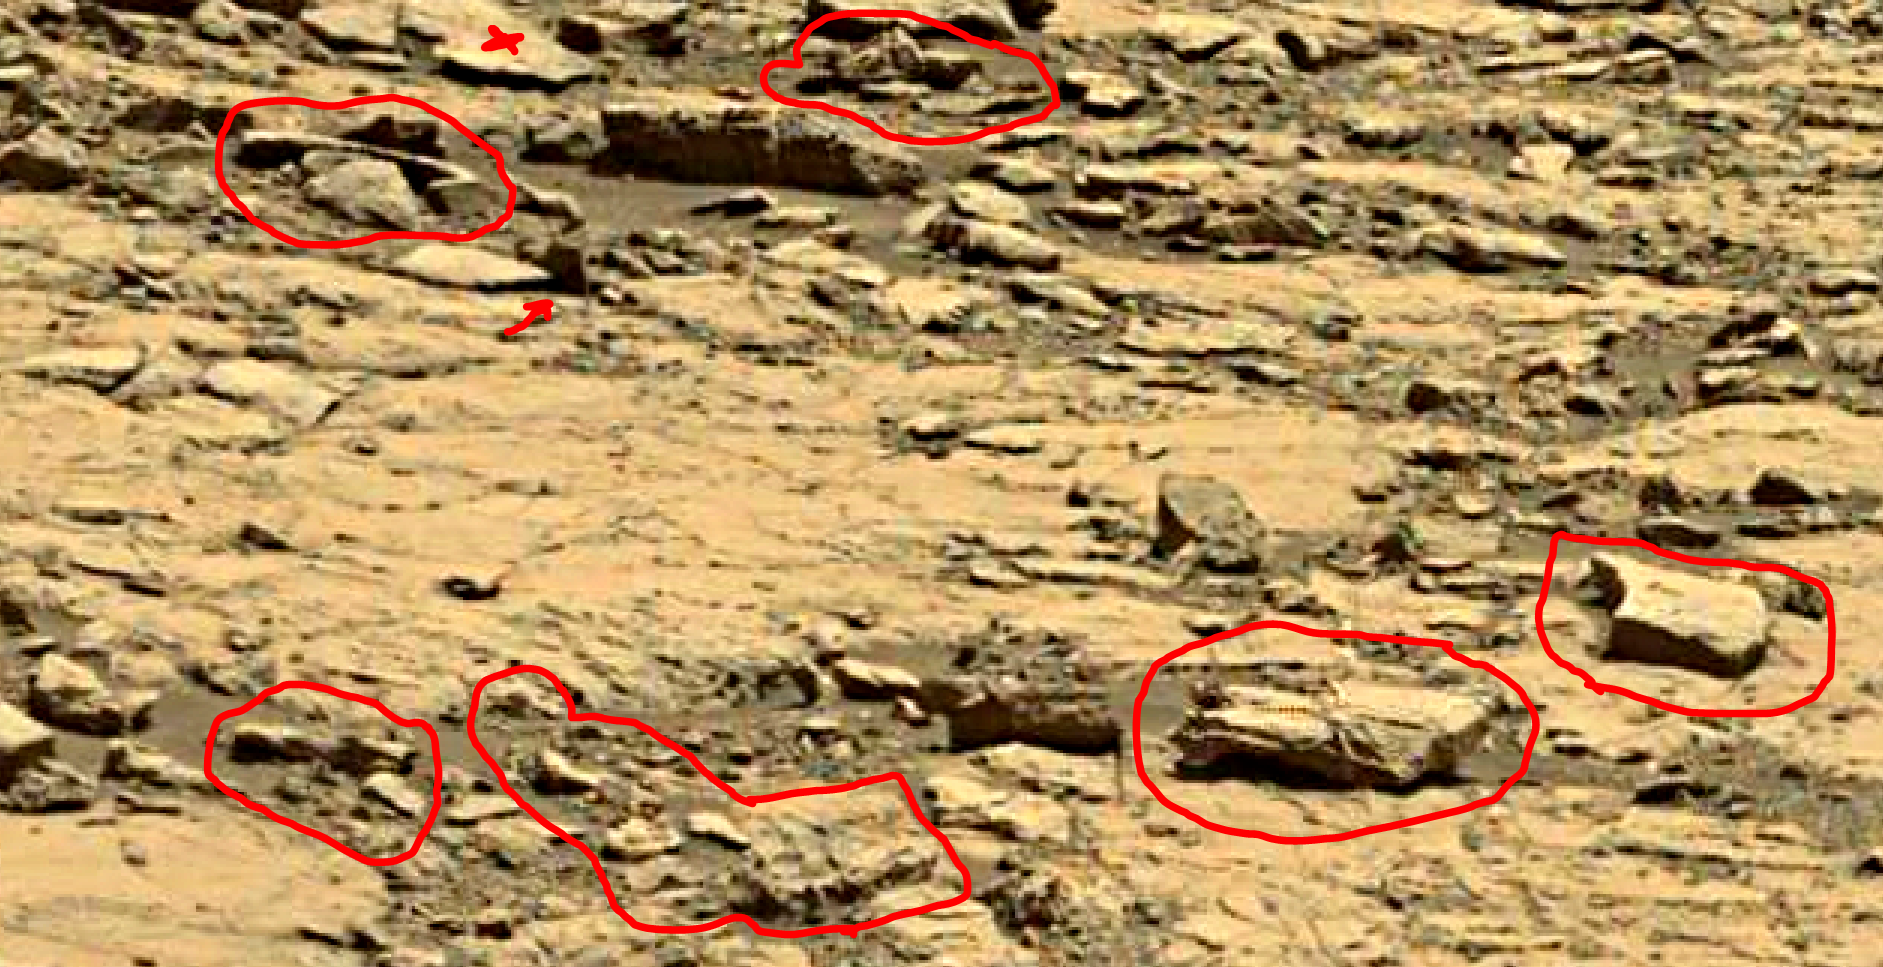 mars sol 1428 anomaly artifacts 1a was life on mars